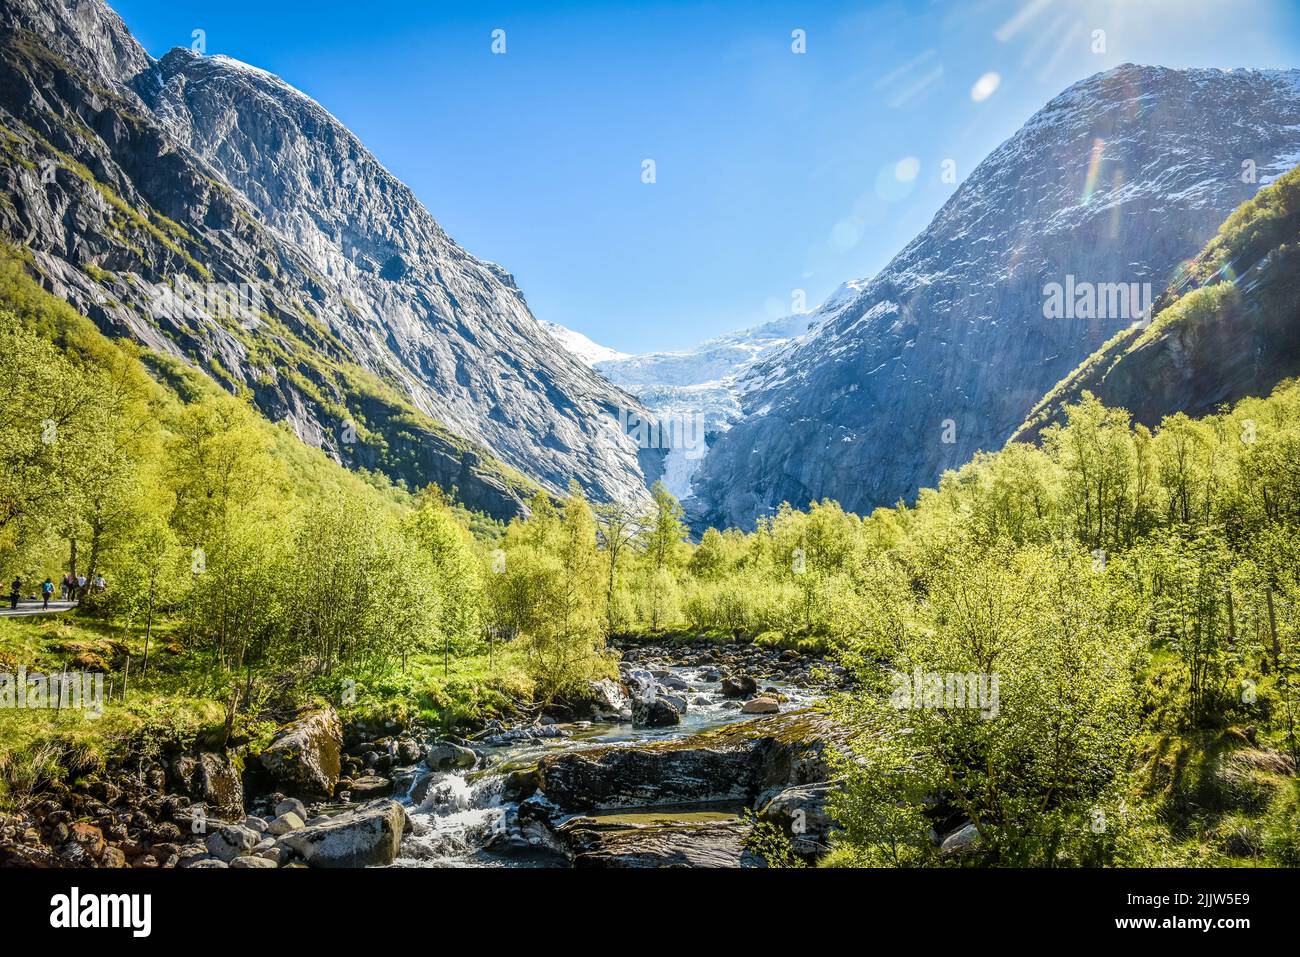 A beautiful view of a mountain in Olden, Norway Stock Photo